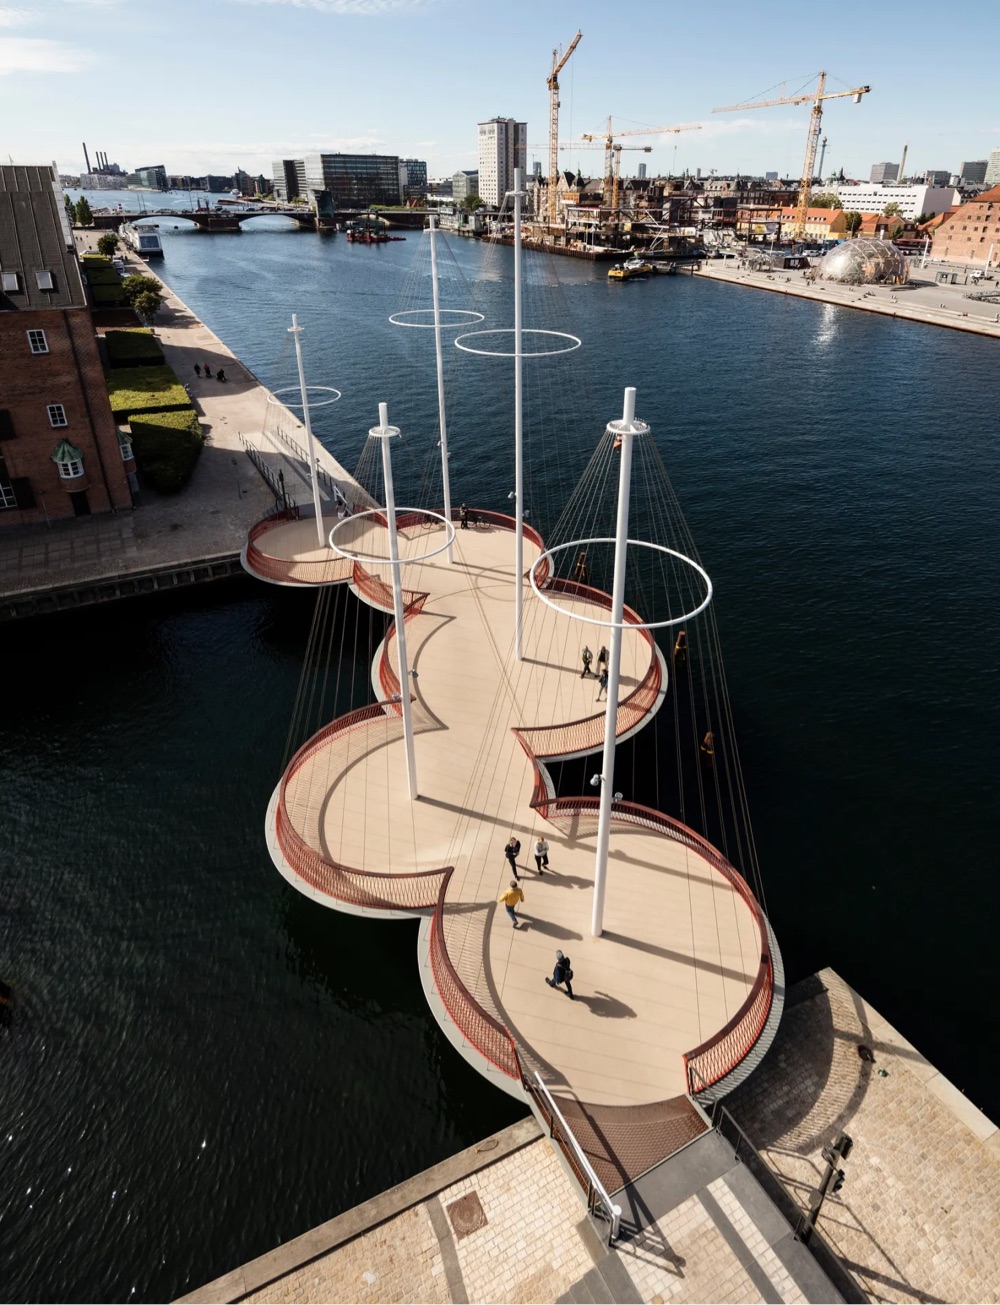 Copenhagen's Circle Bridge, which crosses a canal and is made up of several circles